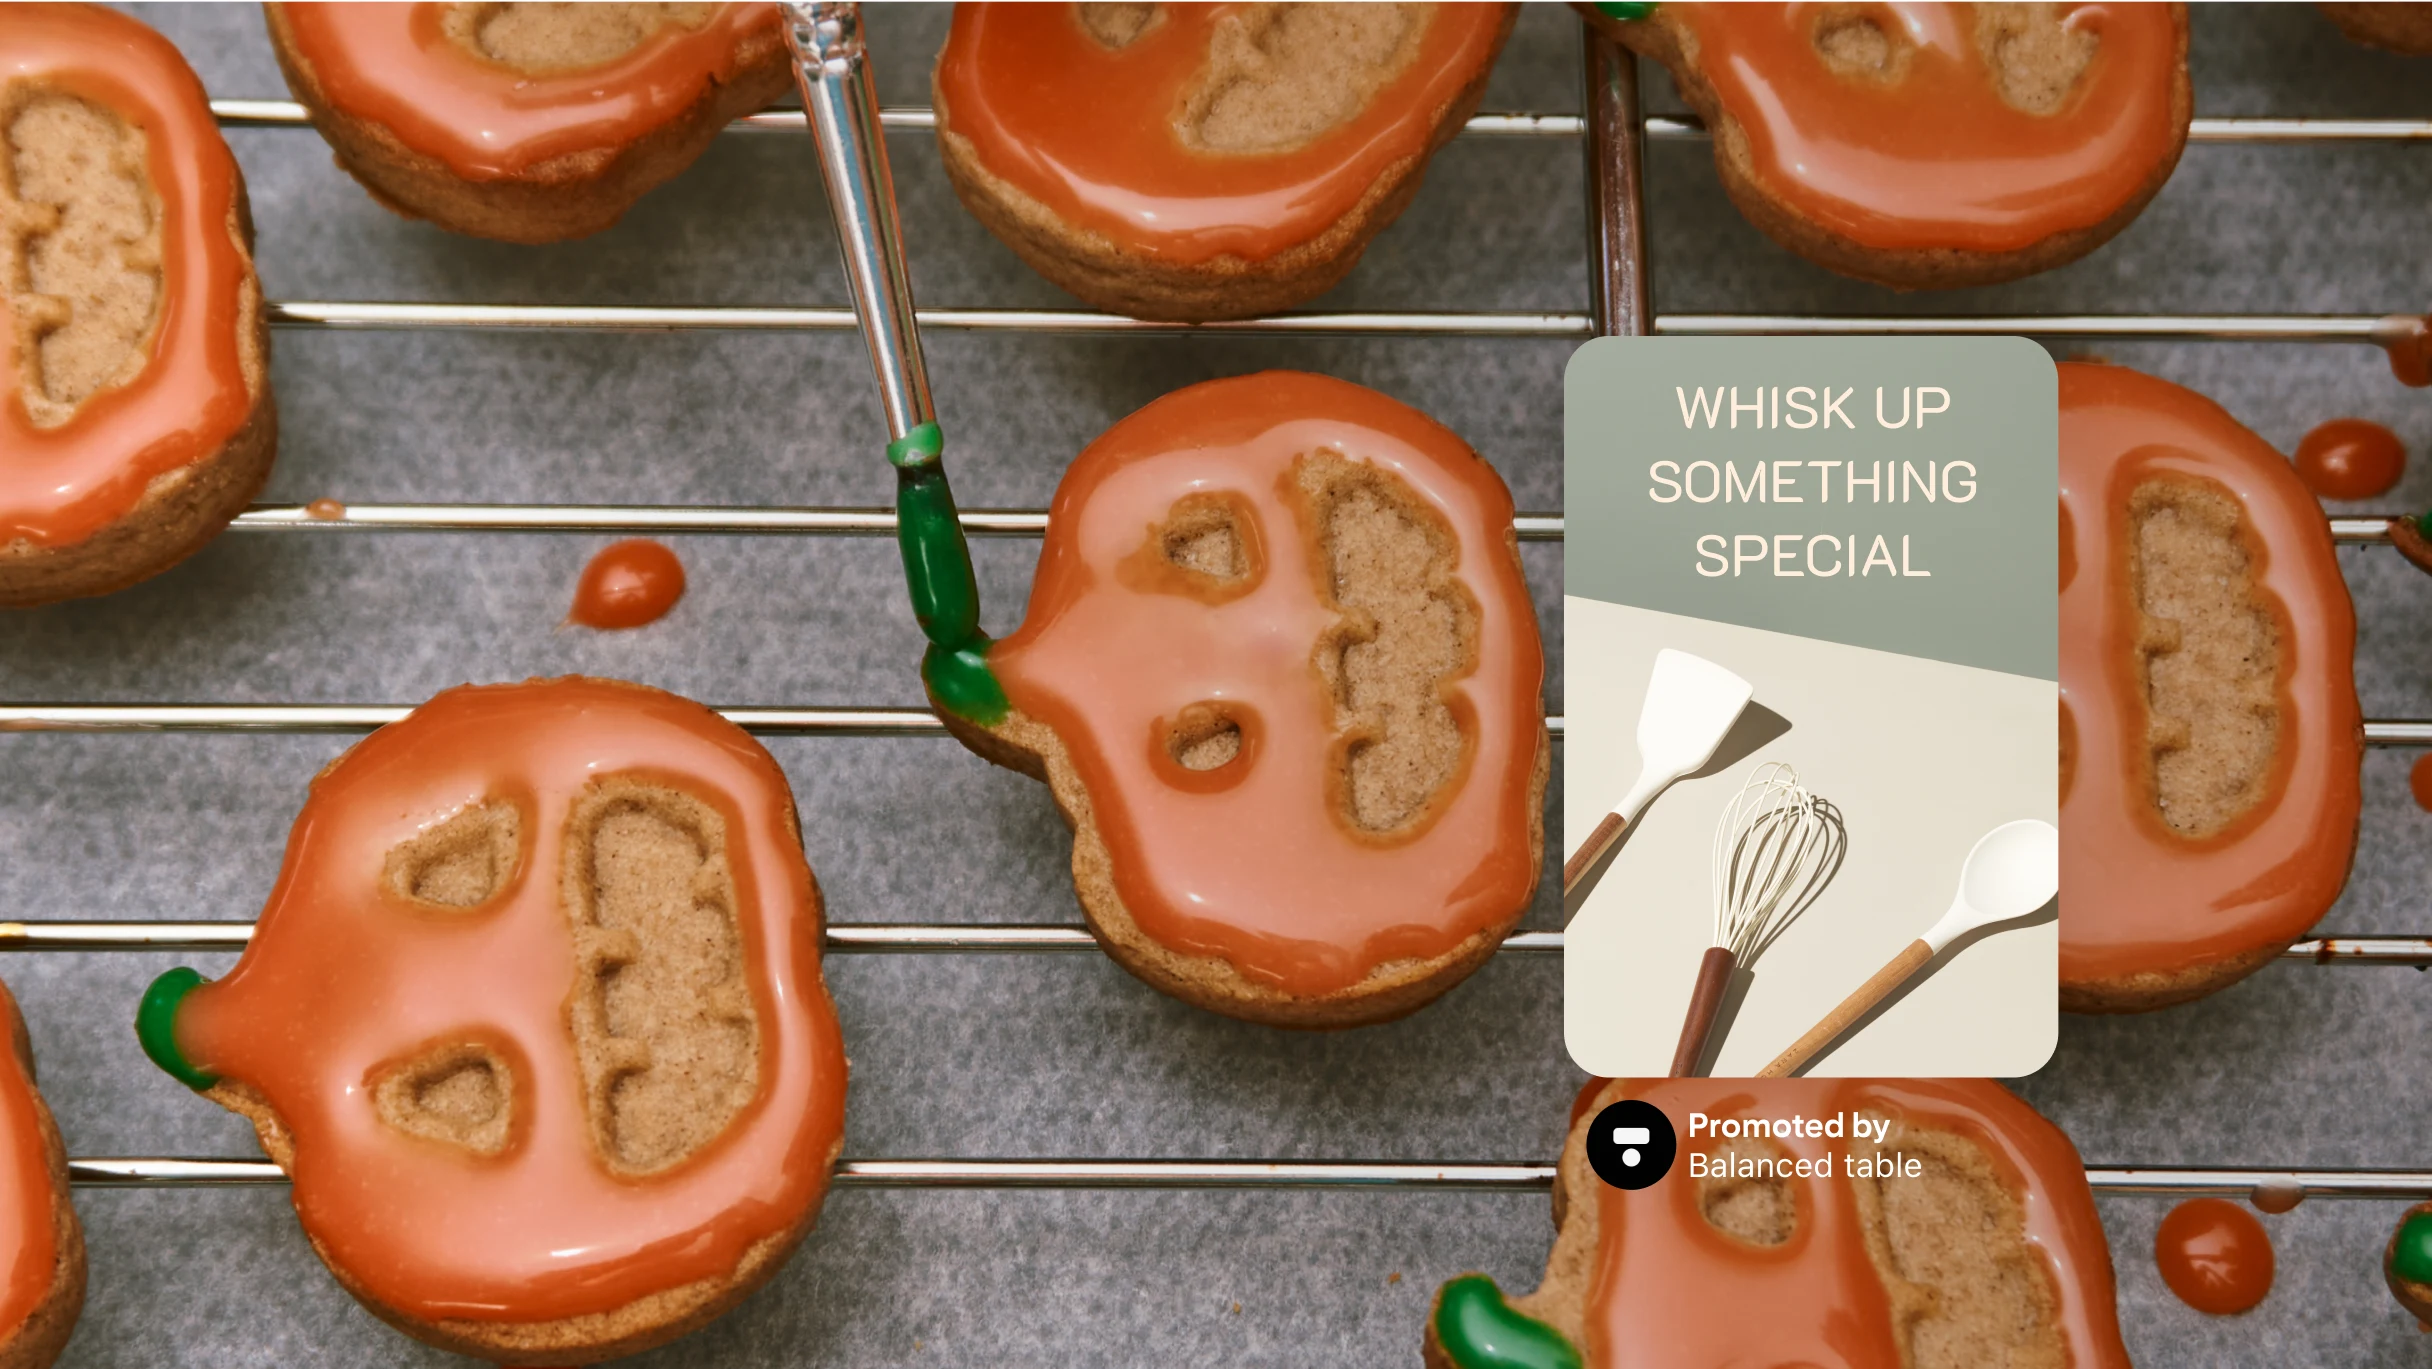 Full-width image featuring a tray of biscuits decorated as pumpkins, and a Pin on the right-hand side featuring whisks with the text ‘Whisk up something special’.